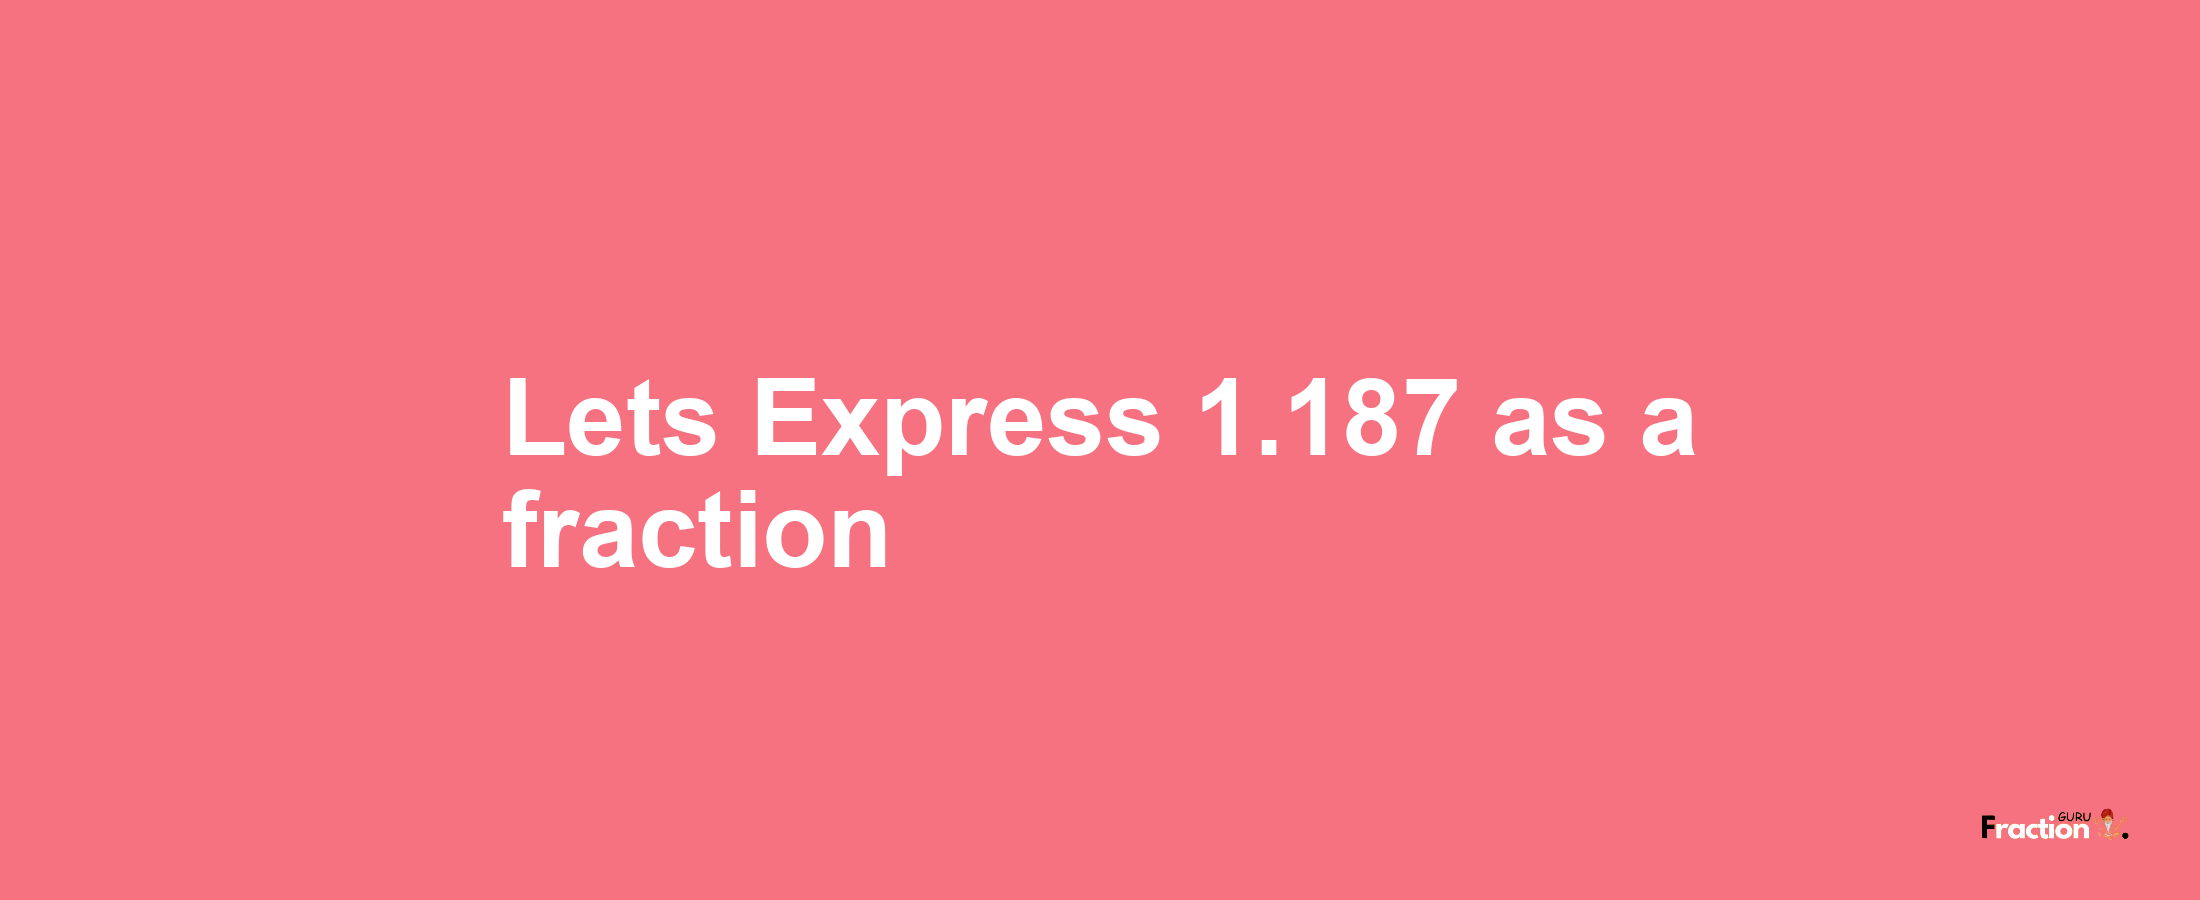 Lets Express 1.187 as afraction